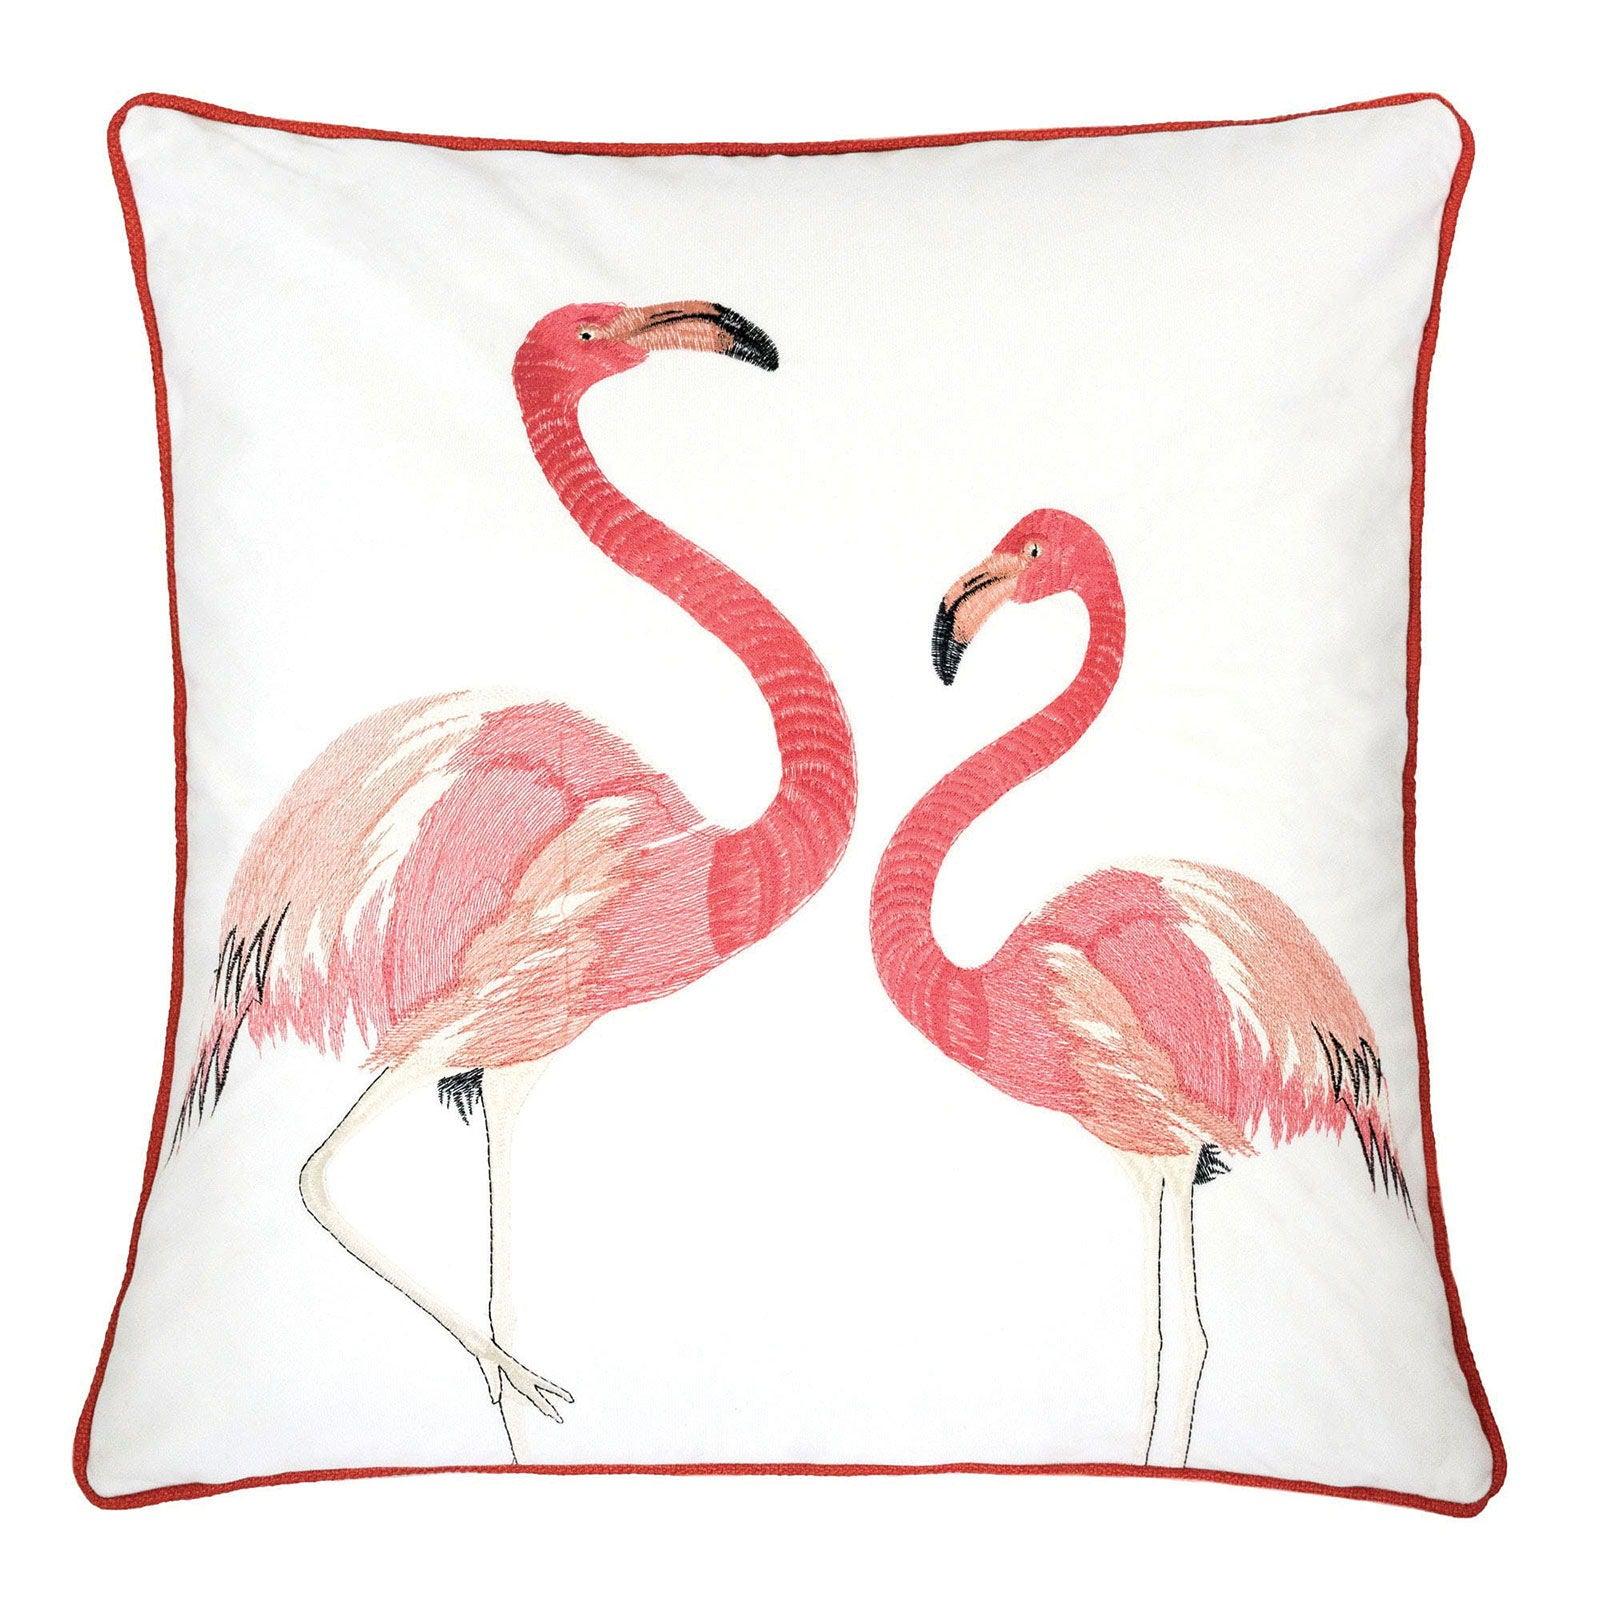 Furniture of America - Lina - Pillow (Set of 2) - Ivory / Pink - 5th Avenue Furniture